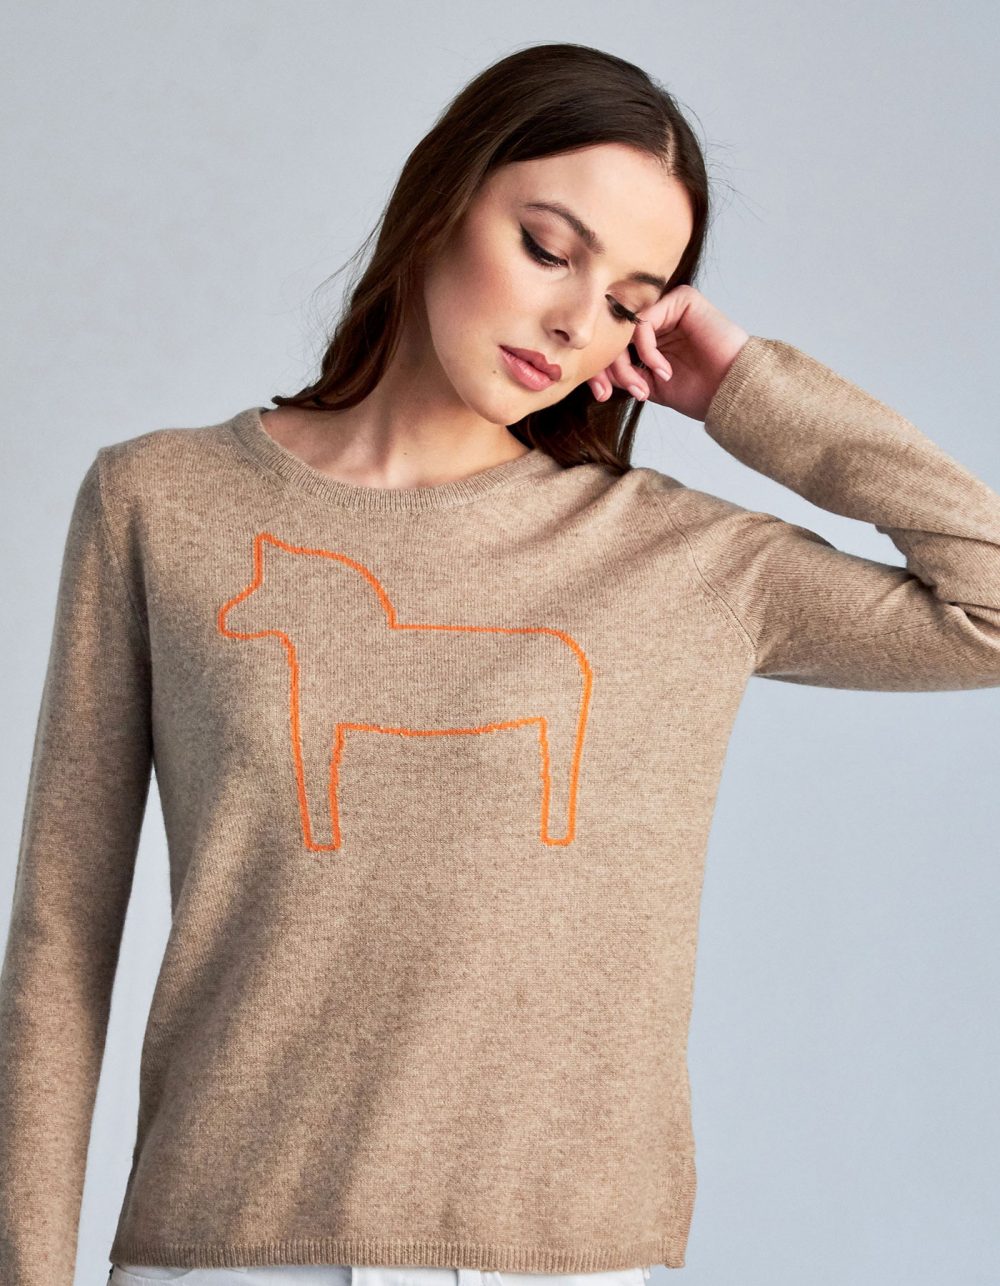 An image of a woman in one of the malin darlin Dalahast horse cashmere jumpers, a pony depicted on beige cashmere.